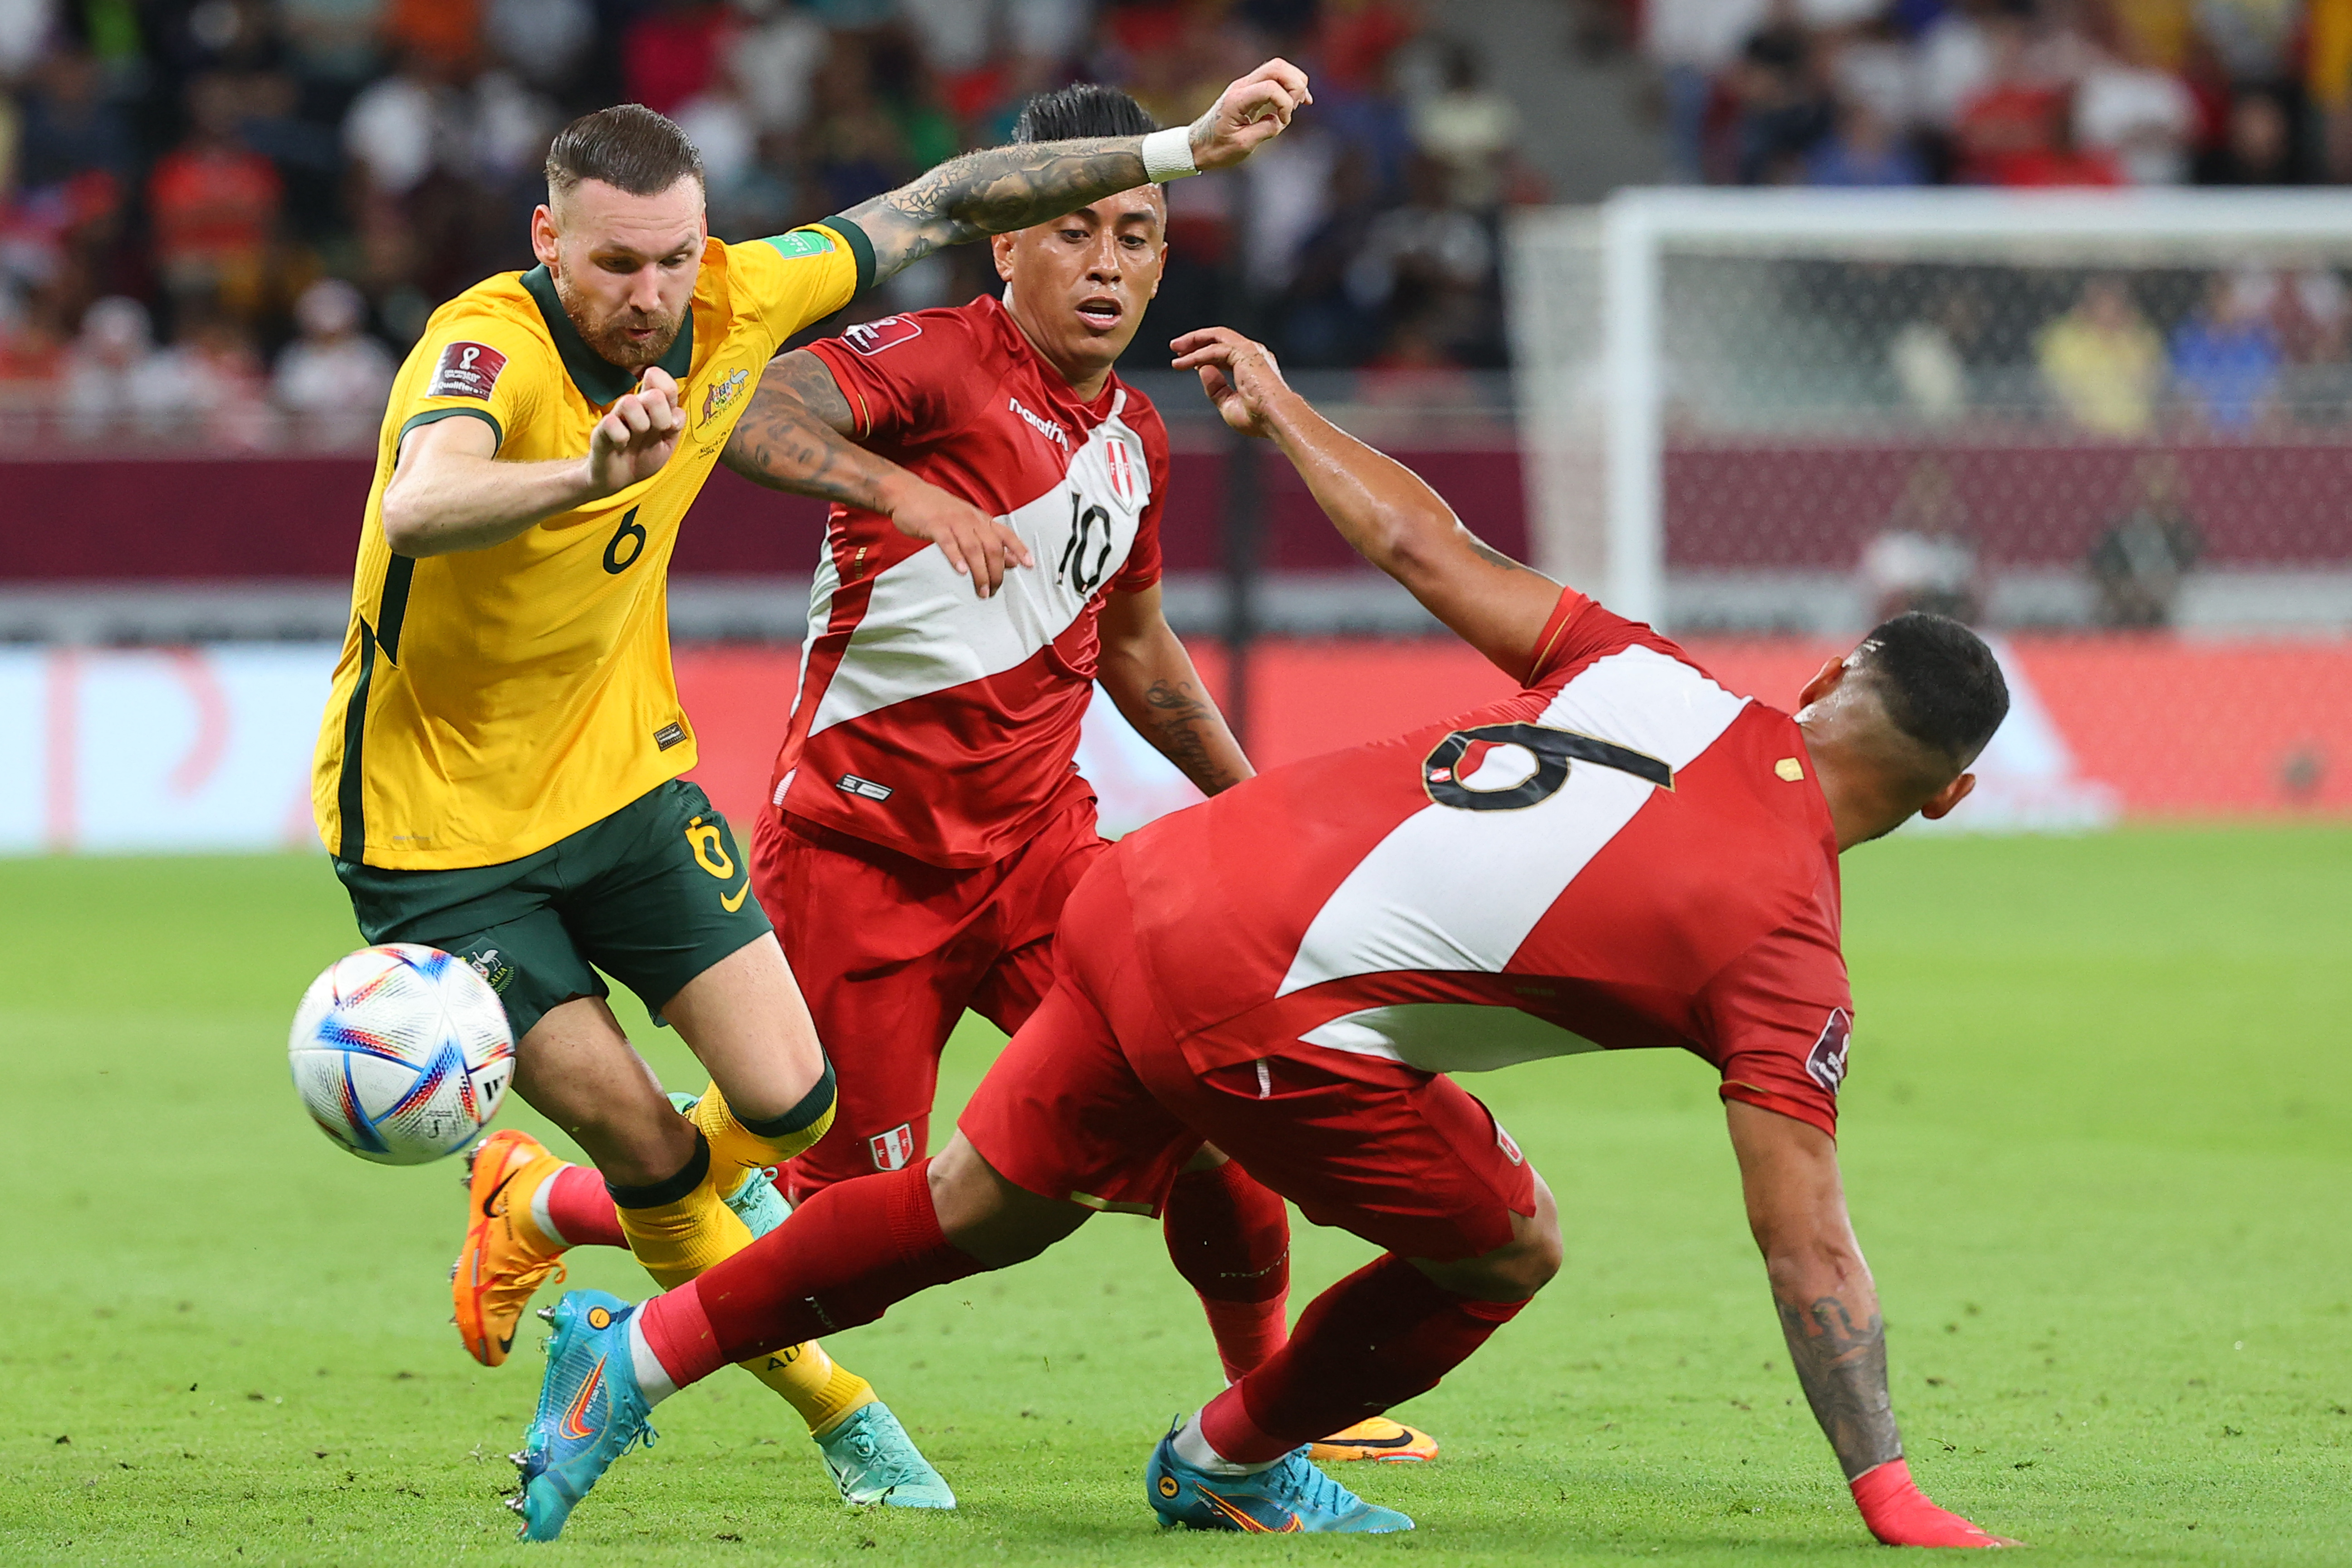 Australia's forward Martin Boyle (L) is tackled by Peru's defender Miguel Trauco (R) during the FIFA World Cup 2022 inter-confederation play-offs match between Australia and Peru on June 13, 2022, at the Ahmed bin Ali Stadium in the Qatari city of Ar-Rayyan. (Photo by KARIM JAAFAR / AFP)